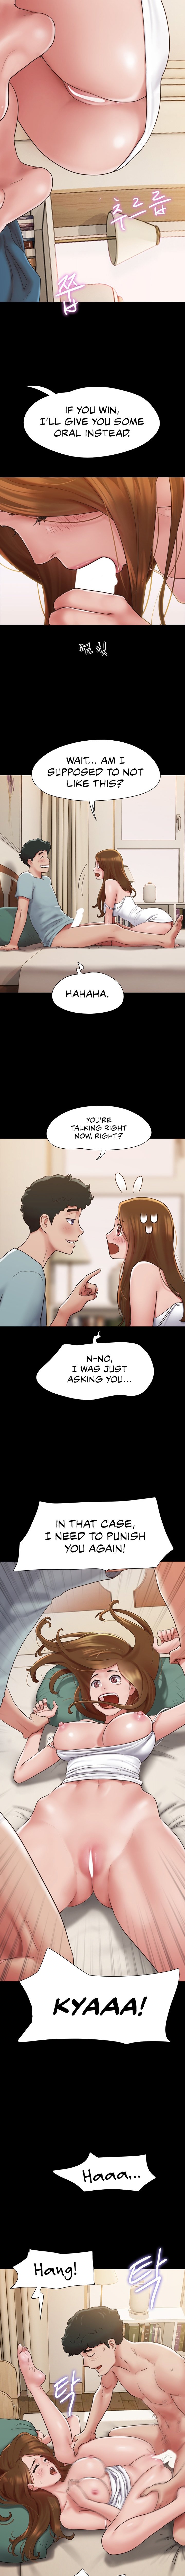 not-to-be-missed-chap-3-10